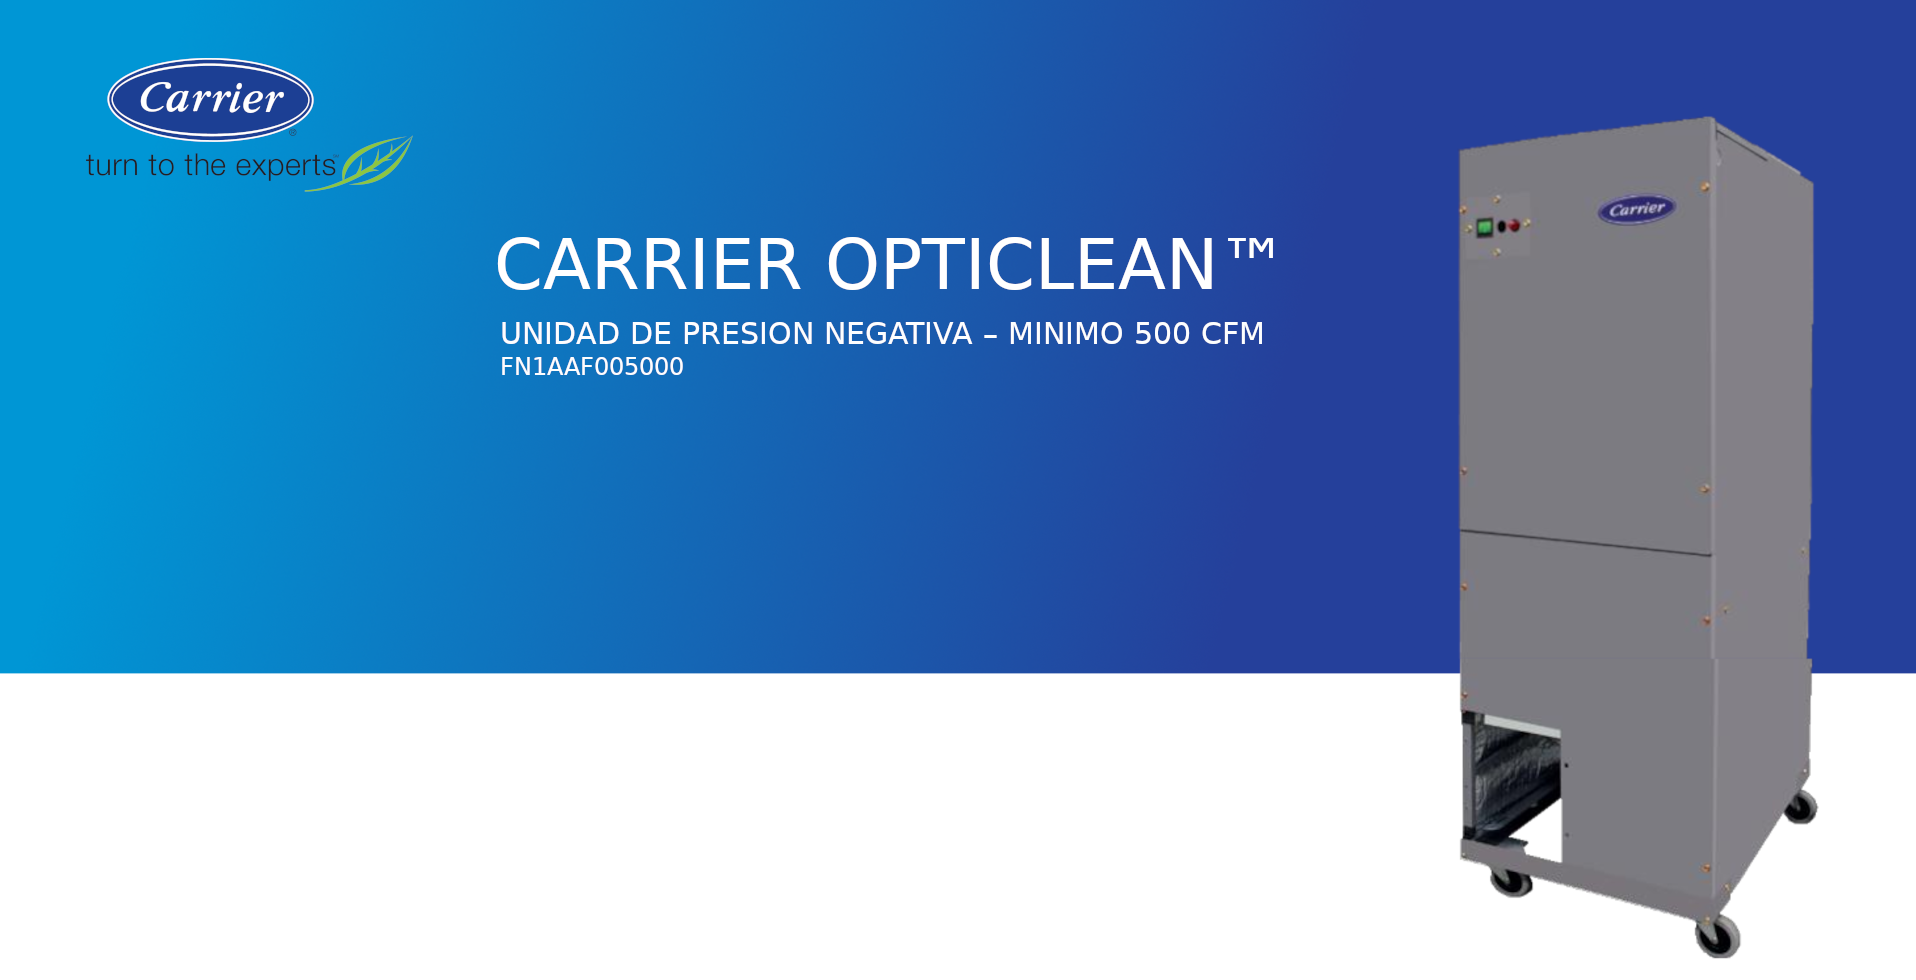 Carrier opticlean